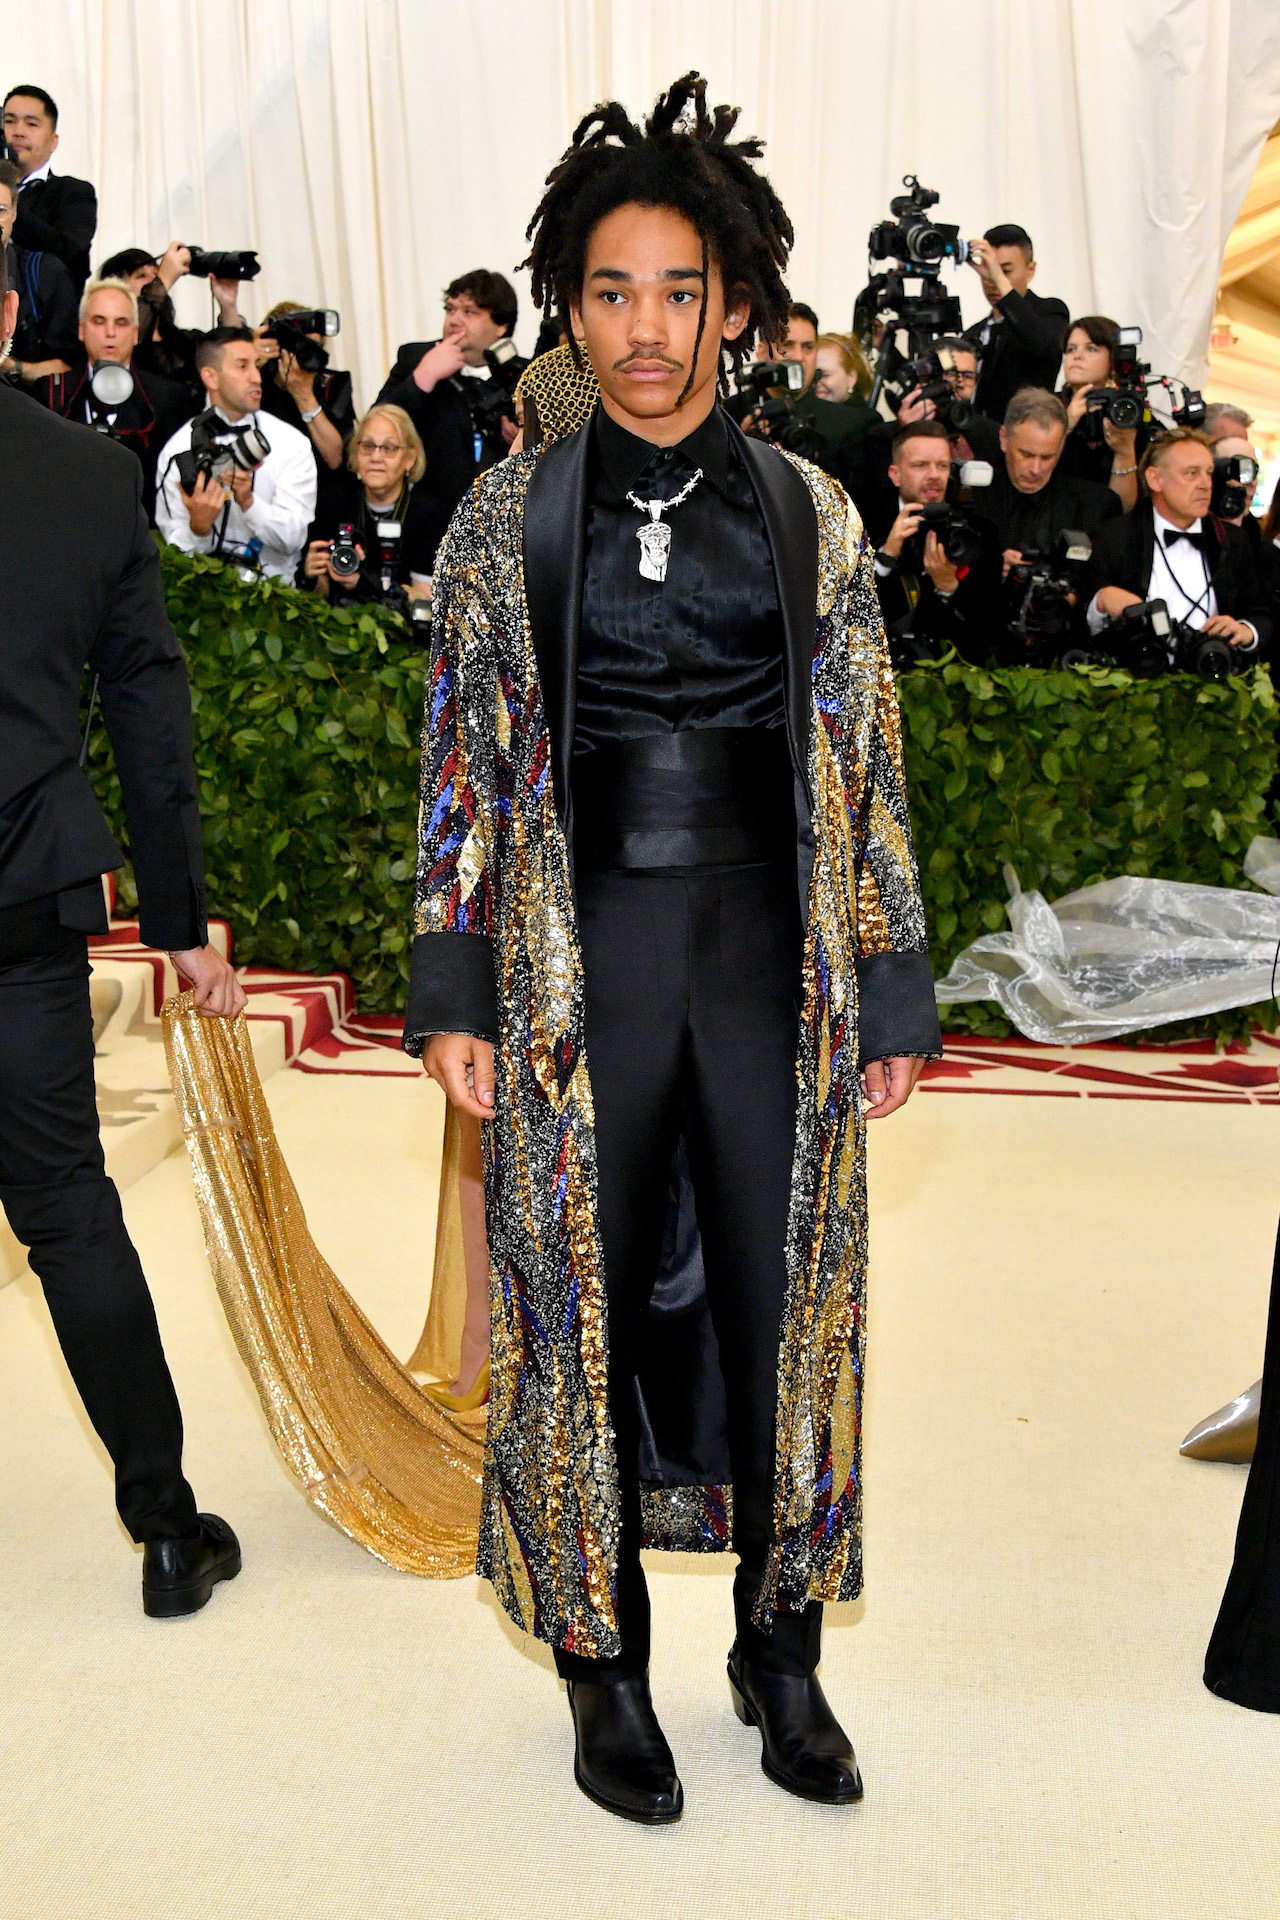 Model and influencer Luka Sabbat wore an extravagant robe entirely hand-embroidered with sequins. The intricate pattern was made from sequins in antique silver, deep red, burgundy, gold and royal blue, while the cuffs, shawl collar and lining were in black silk. Luka also wore tuxedo trousers made from sustainable materials organic silk, TENCEL® and wool. (Photo by Dia Dipasupil/WireImage)